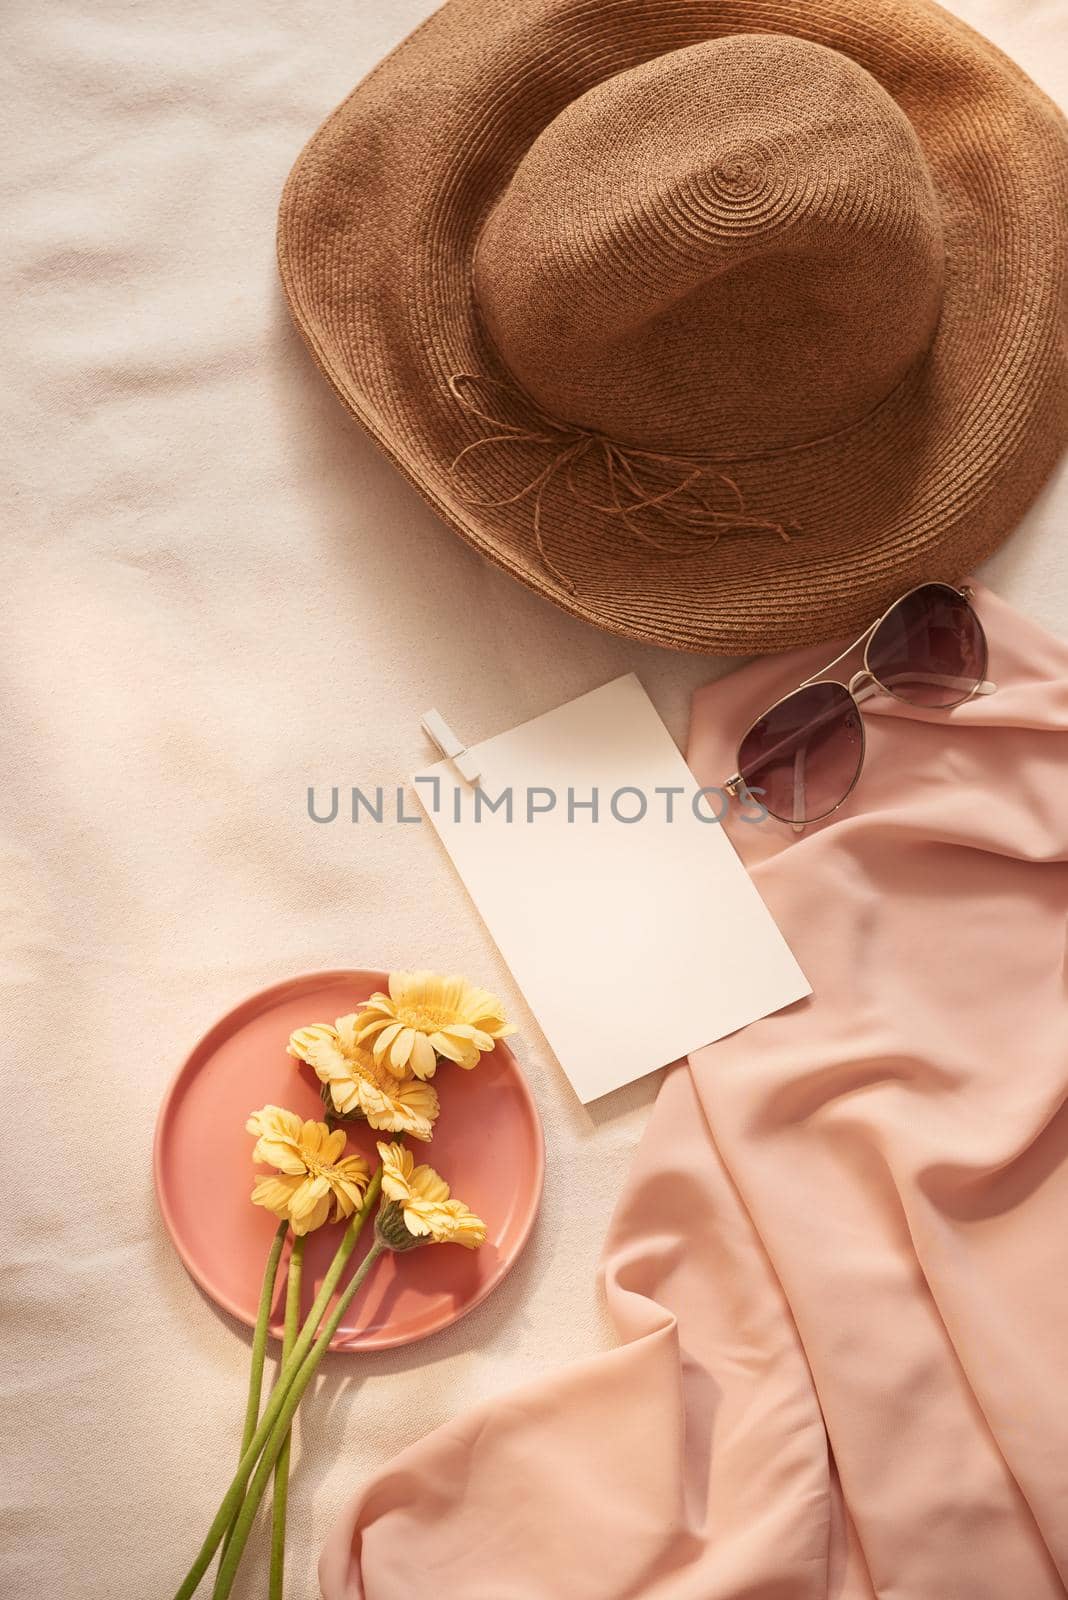 Flowers on the plate with hat, galsses and card on the light background by makidotvn